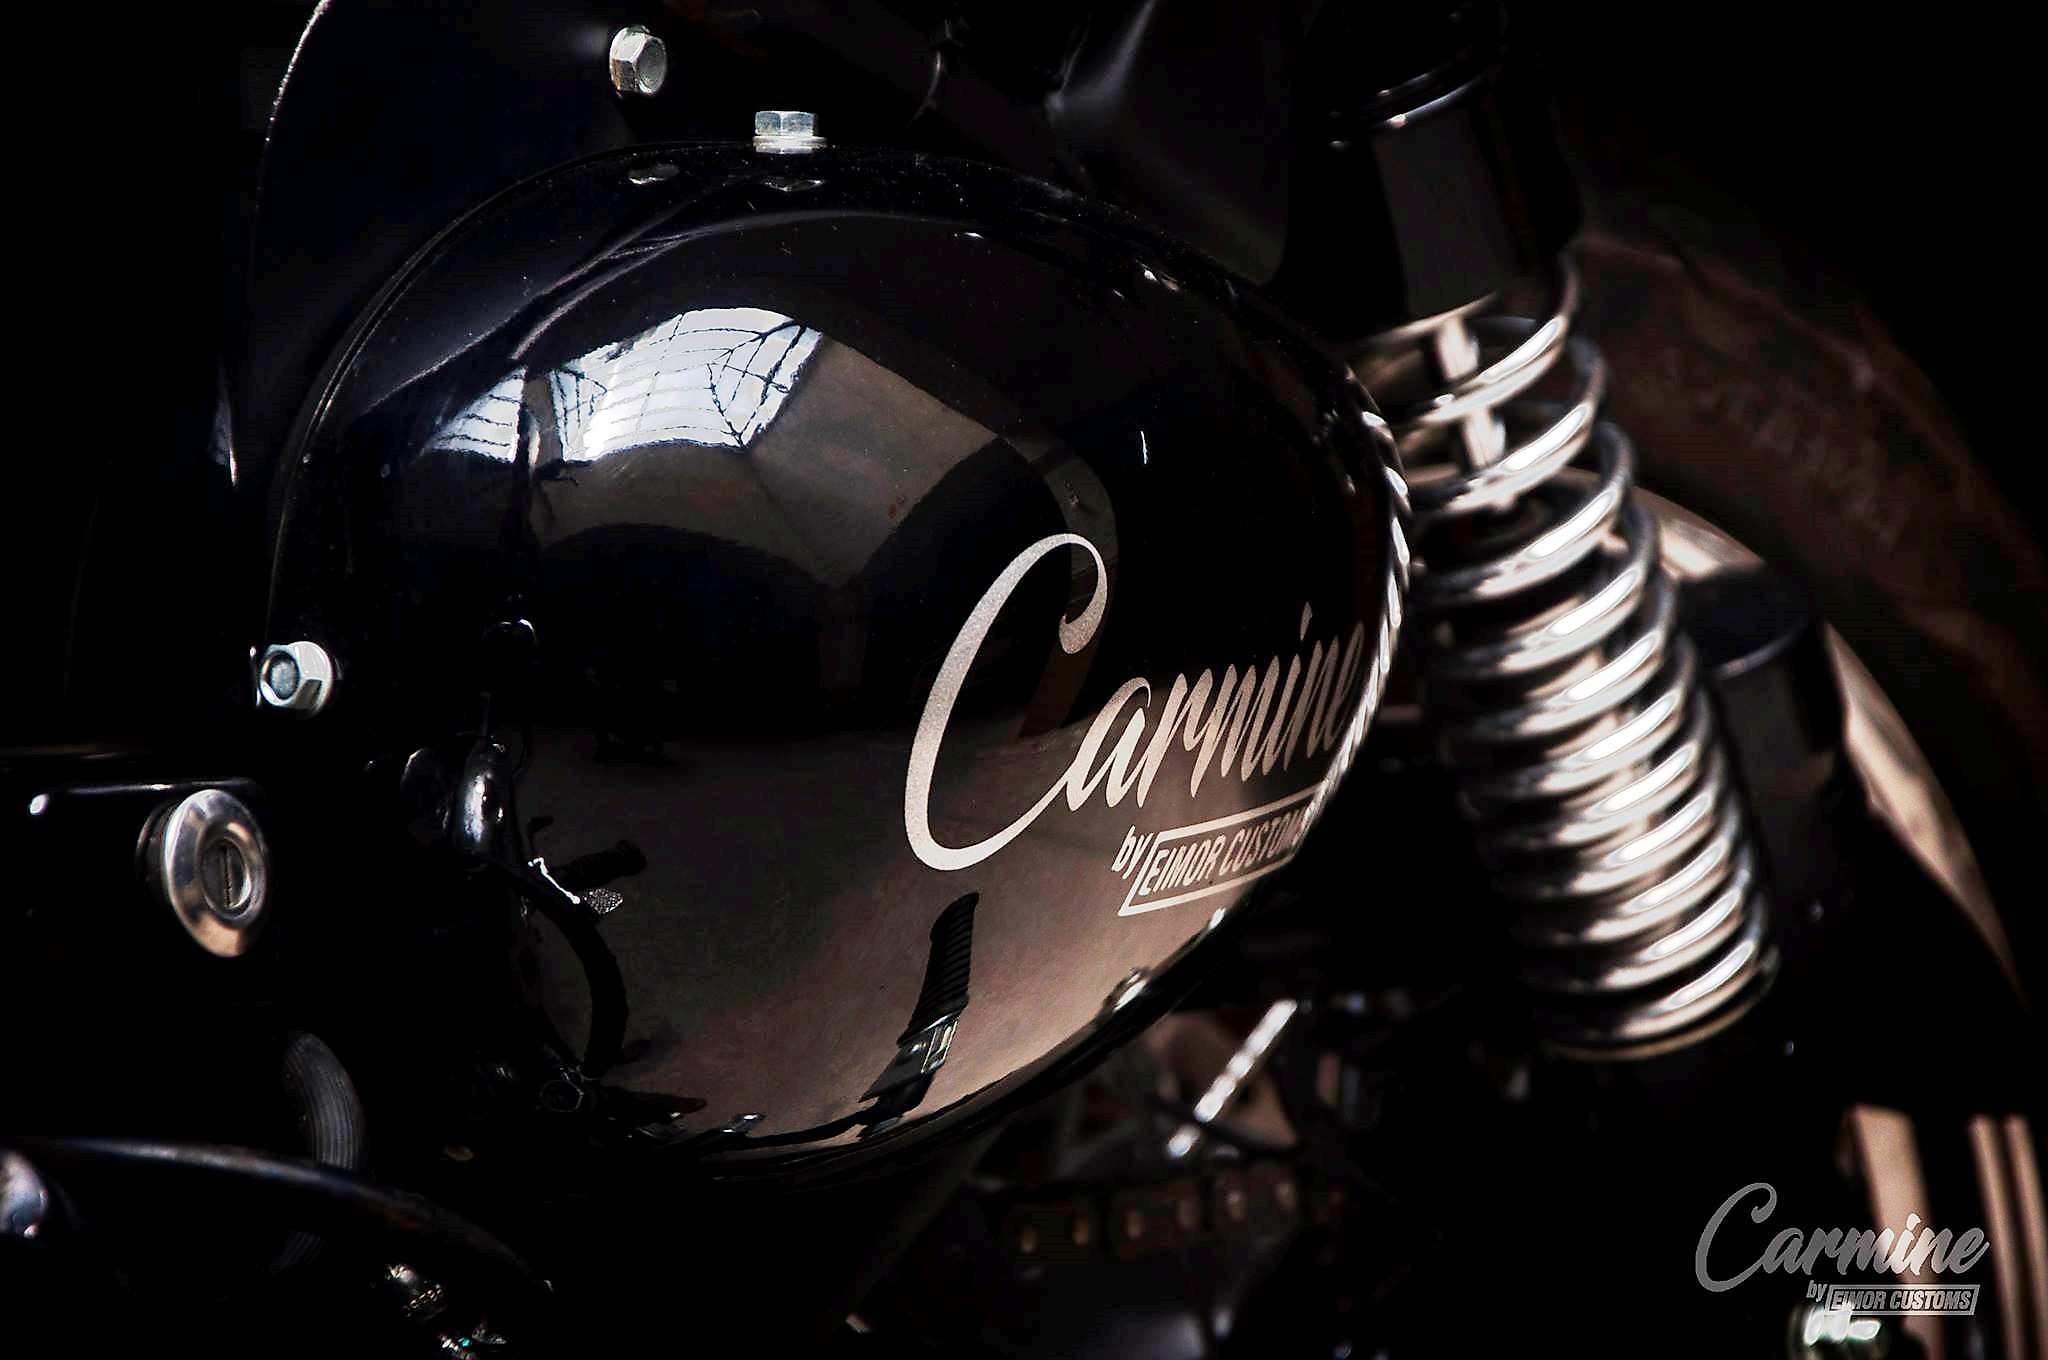 Meet Royal Enfield Carmine 350 Equipped with Premium Parts - back